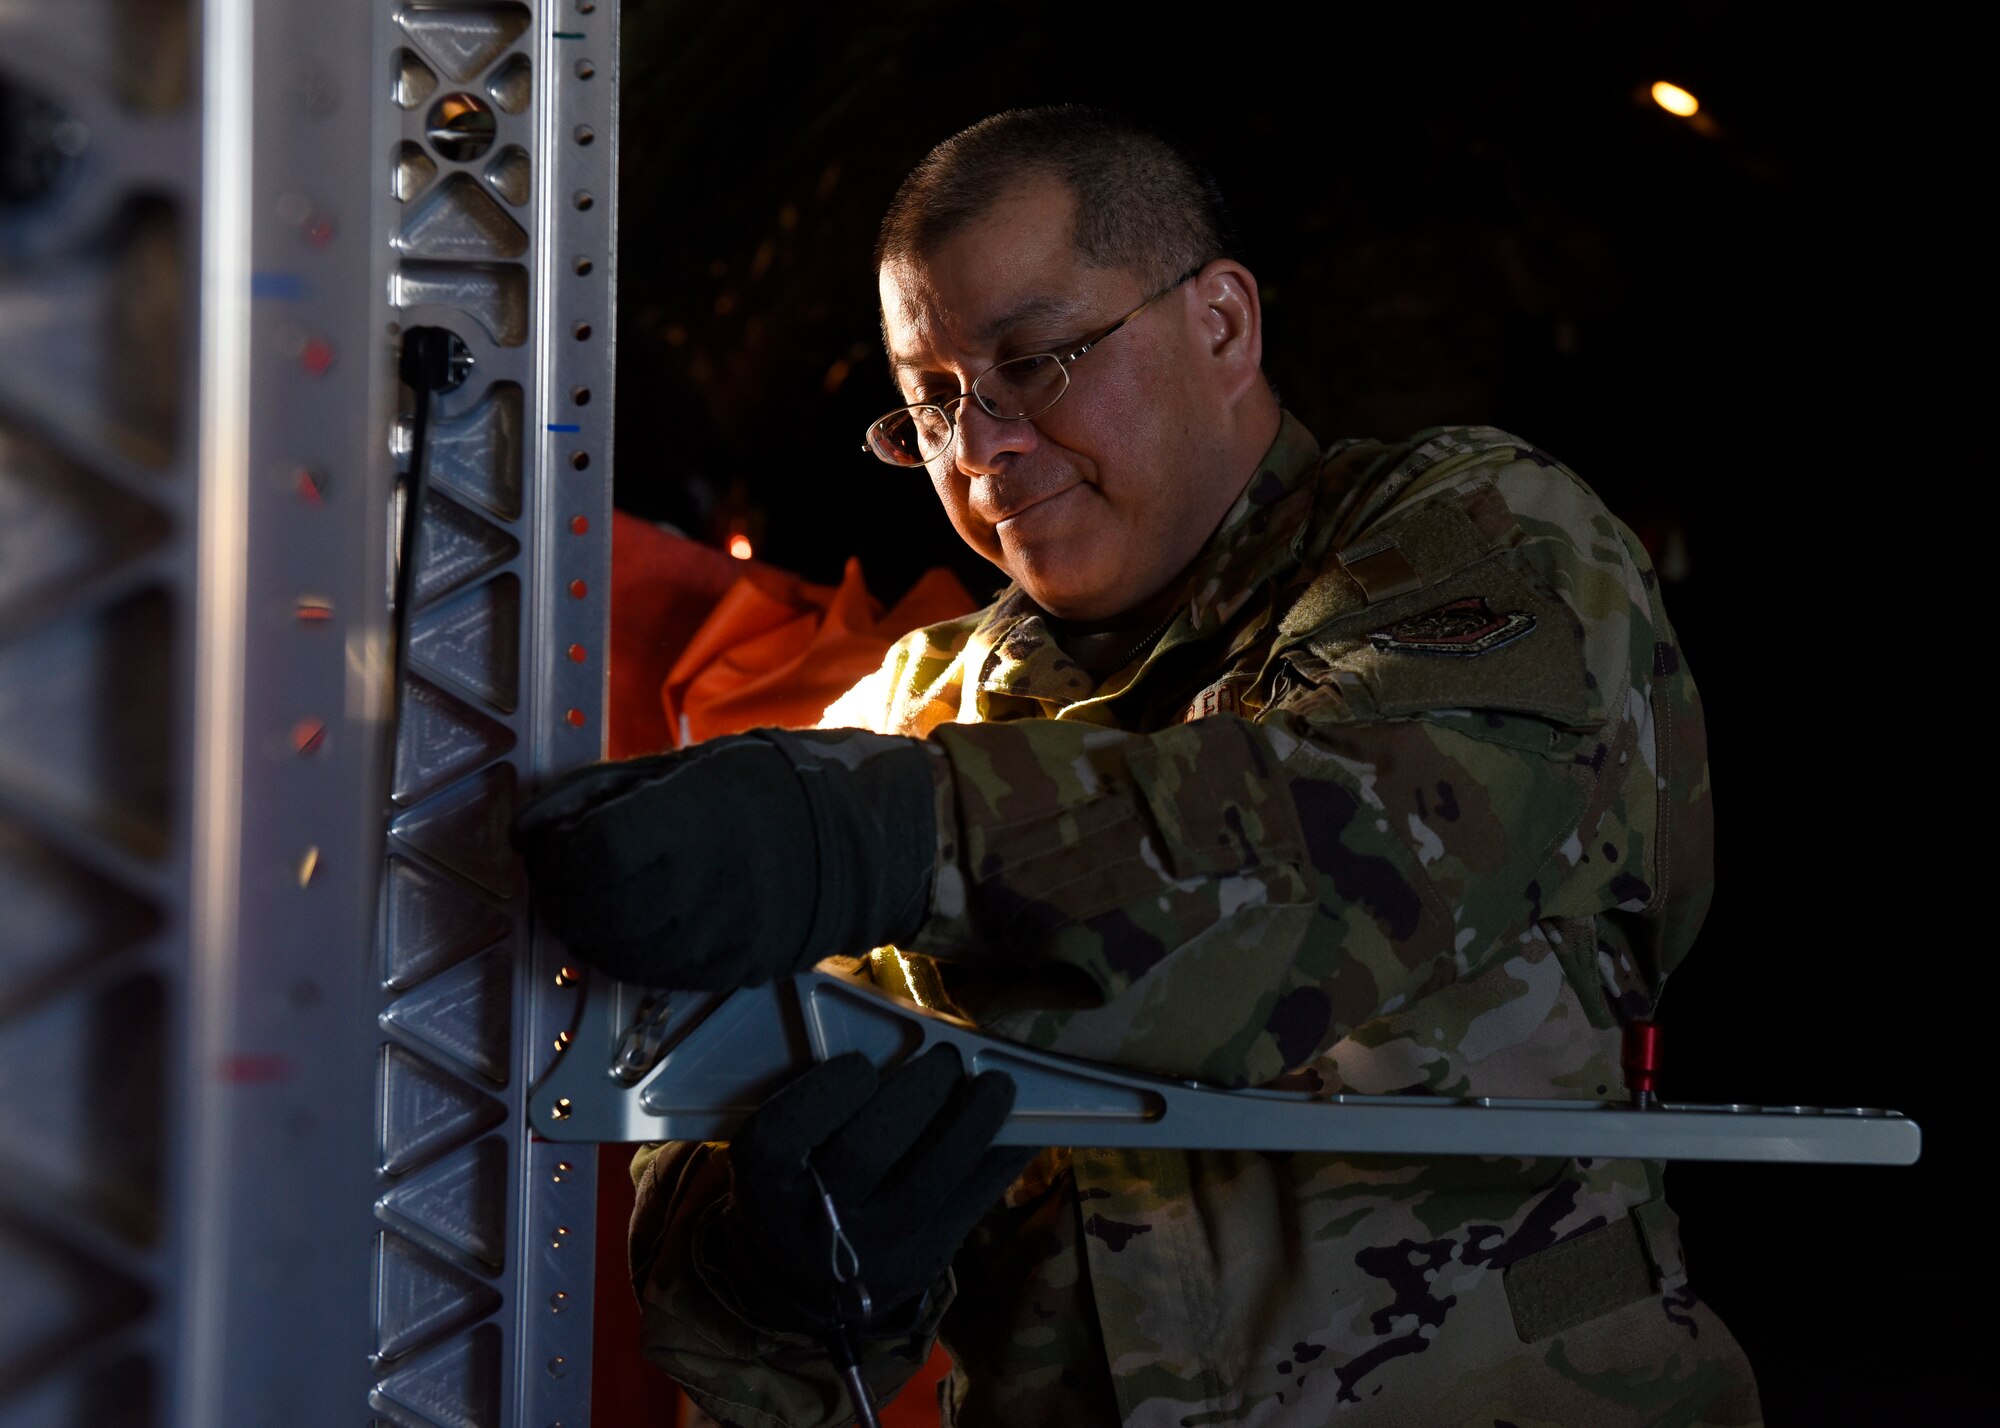 U.S. Air Force Lt. Col. David Hernandez, 43rd Aeromedical Evacuation Squadron chief flight nurse, prepares a litter stanchion system on a Fairchild Air Force Base KC-135 Stratotanker prior to an aeromedical evacuation mission at Travis Air Force Base, California, Feb. 11, 2020. Training consisted of familiarization of the KC-135 airframe for emergency evacuation procedures, in-flight medical emergency simulations, aircraft emergency simulations and how-to best organize medical equipment for both Fairchild and Travis Airmen in order to qualify for semi-annual requirements. (U.S. Air Force photo by Senior Airman Lawrence Sena)